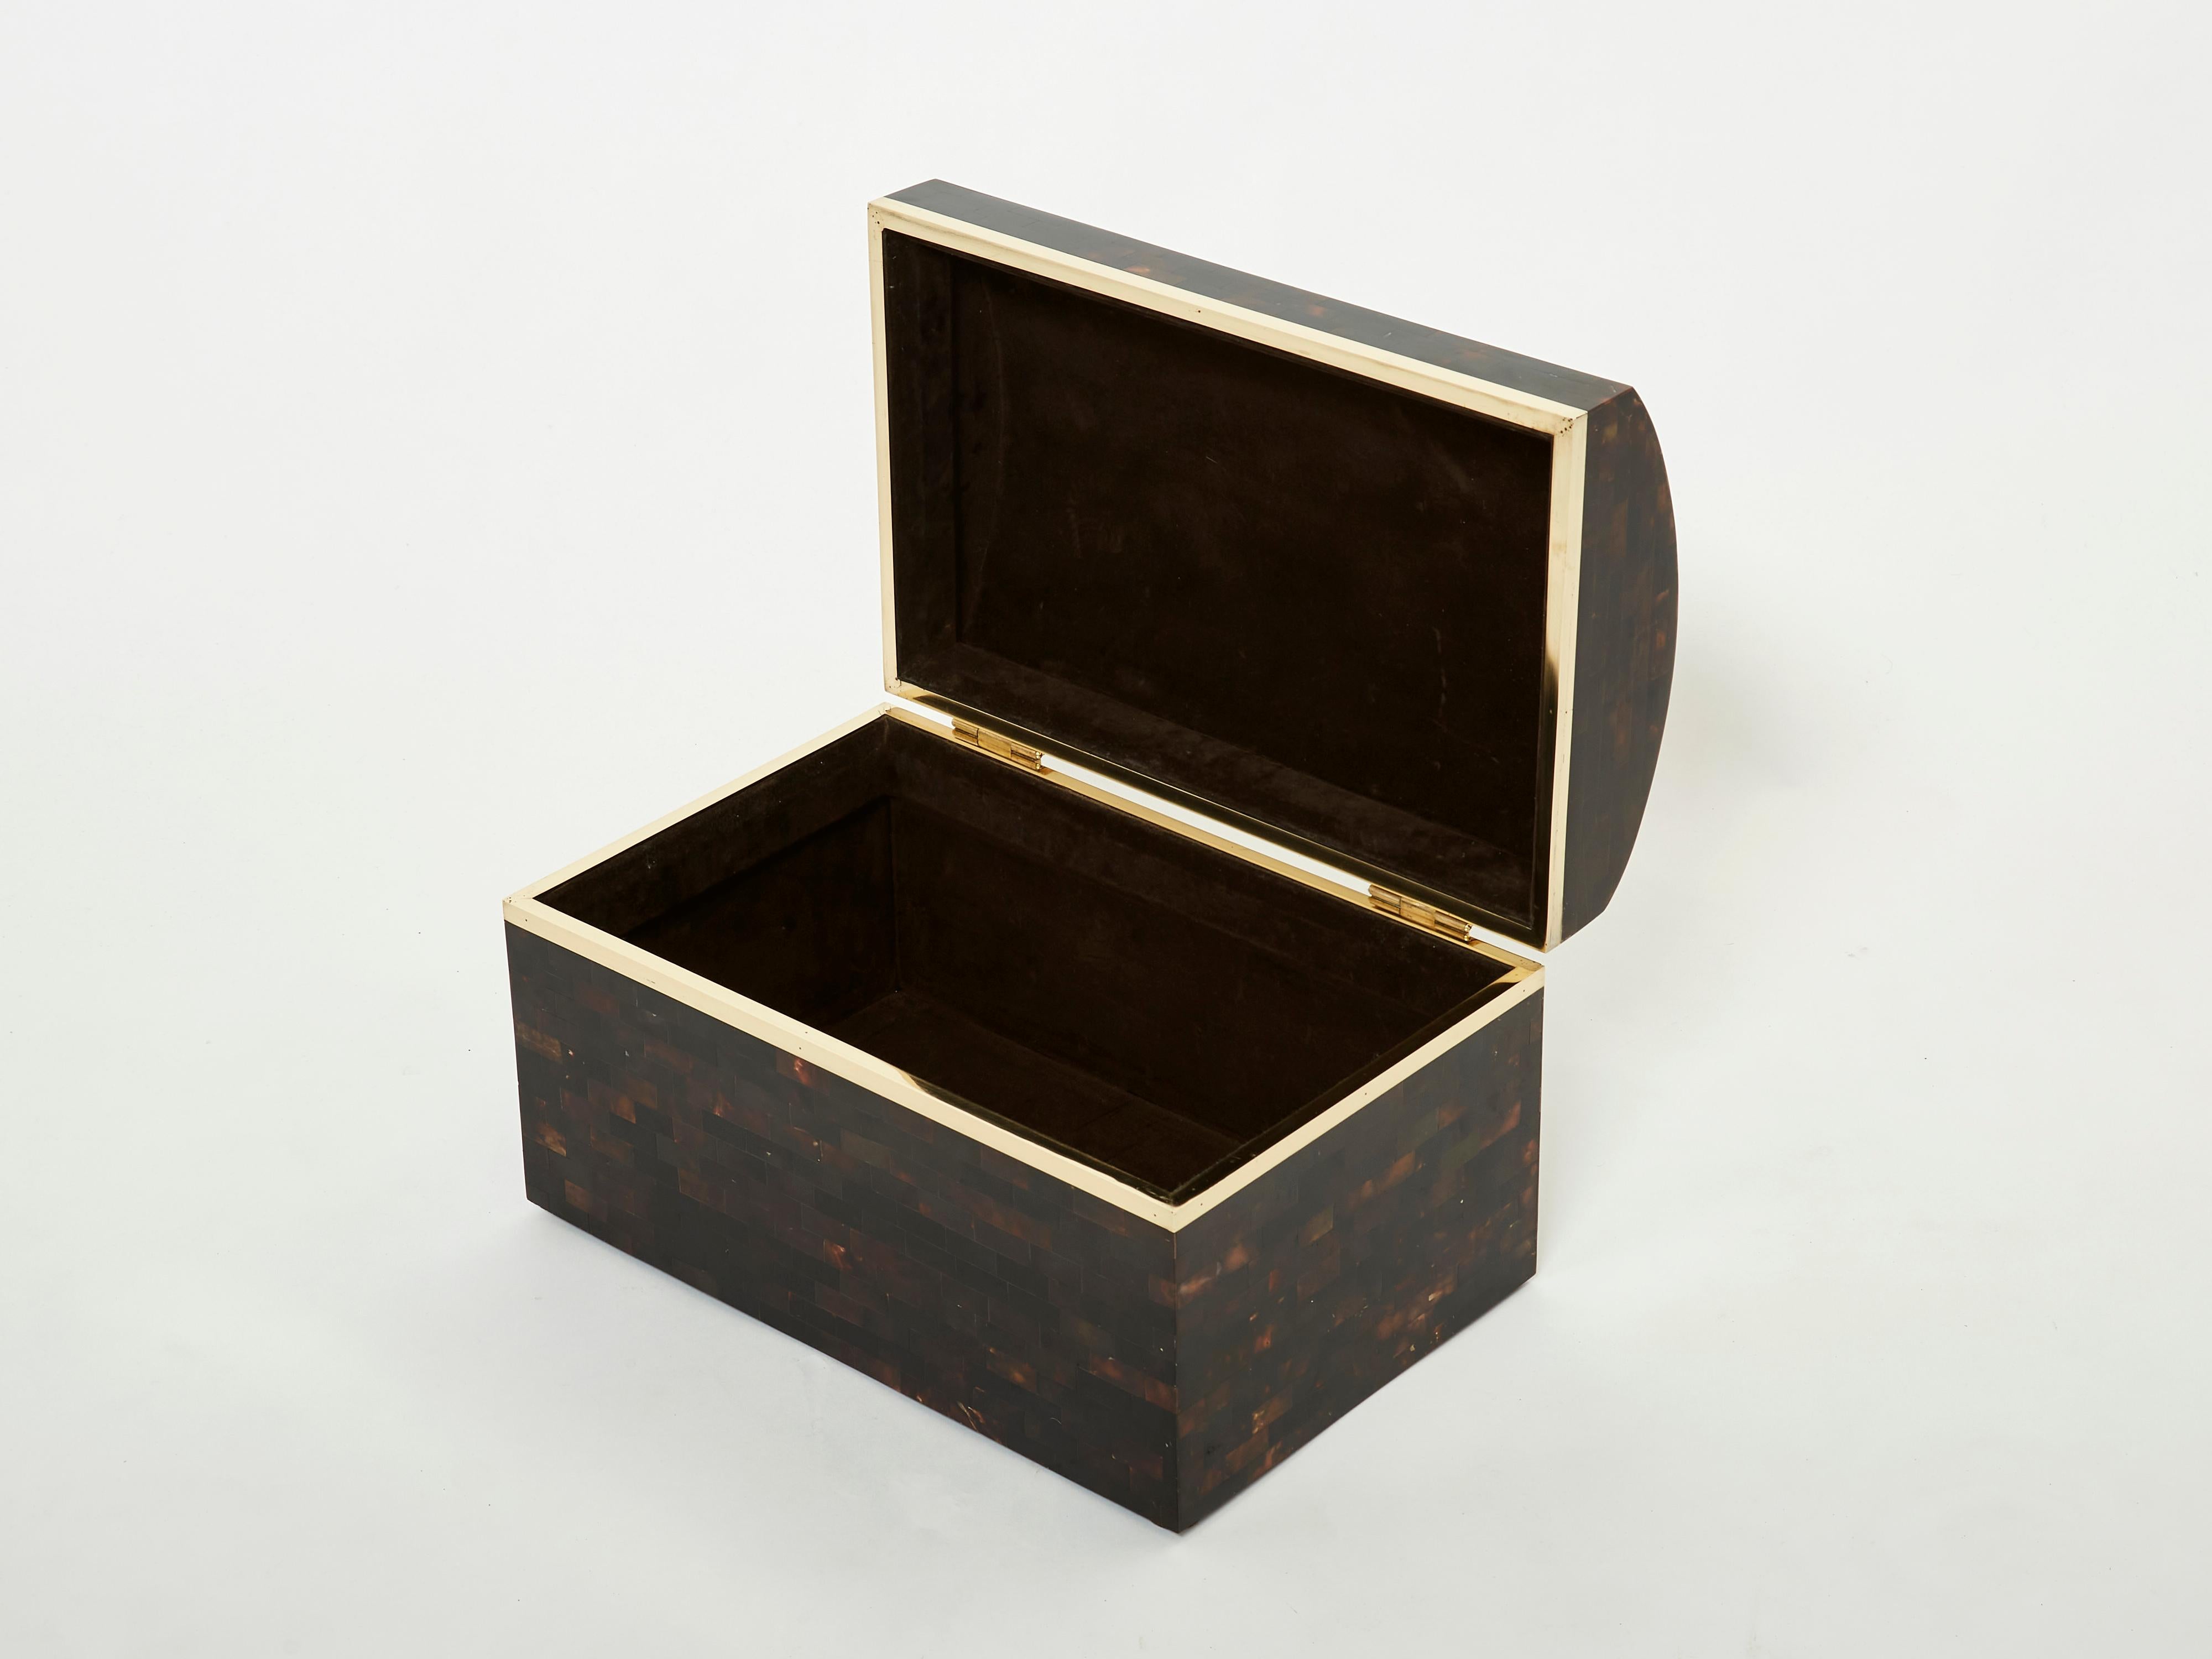 Beautiful midcentury decorative trunk box made in Italy in the 1960s. This large jewellery or make-up box is covered in Horn tessellated pieces, with brass frame and and large brass hinges. The mix of brass and Horn is really beautiful. The inside